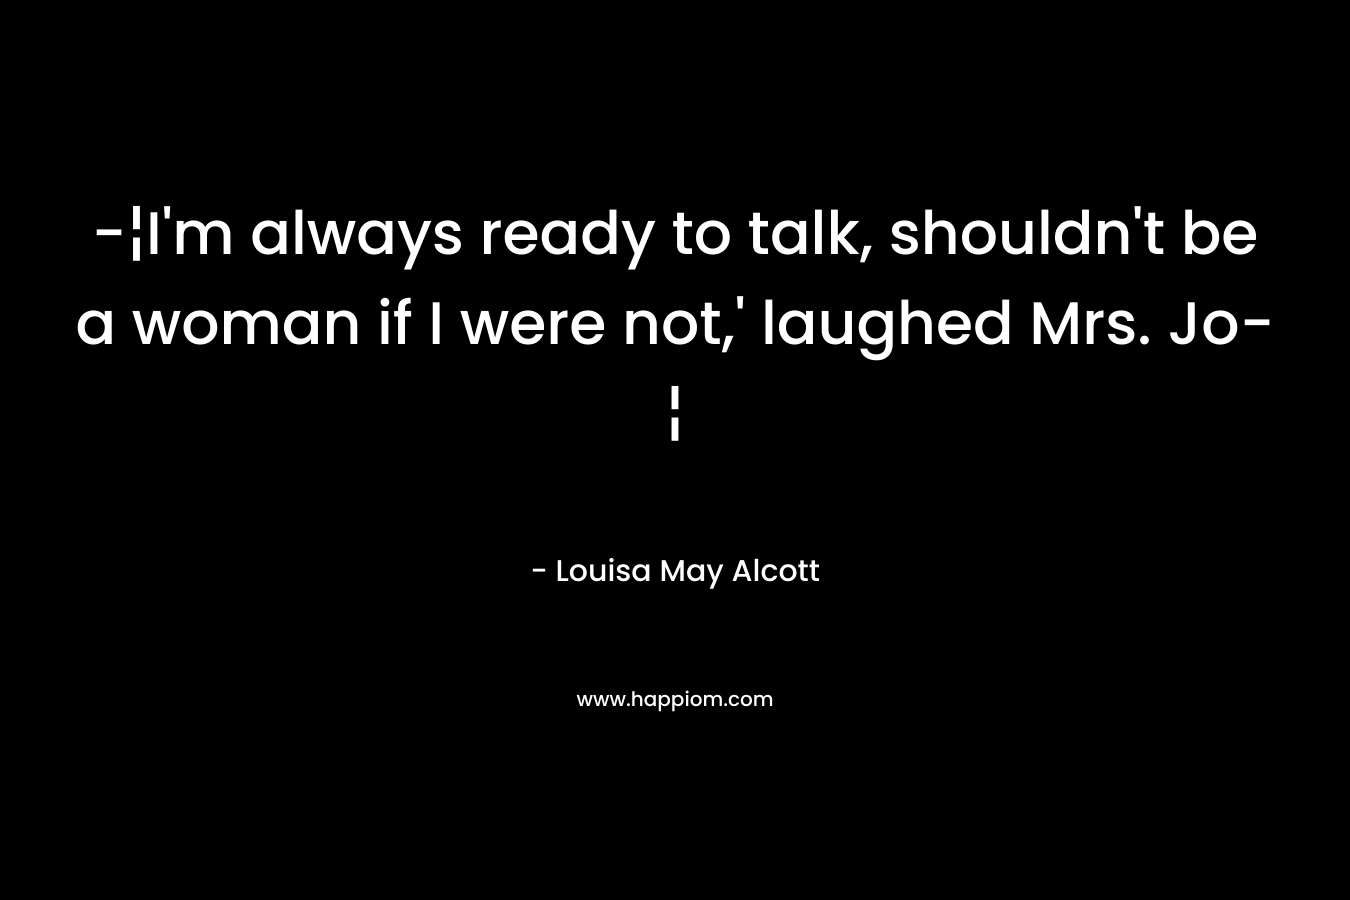 -¦I’m always ready to talk, shouldn’t be a woman if I were not,’ laughed Mrs. Jo-¦ – Louisa May Alcott